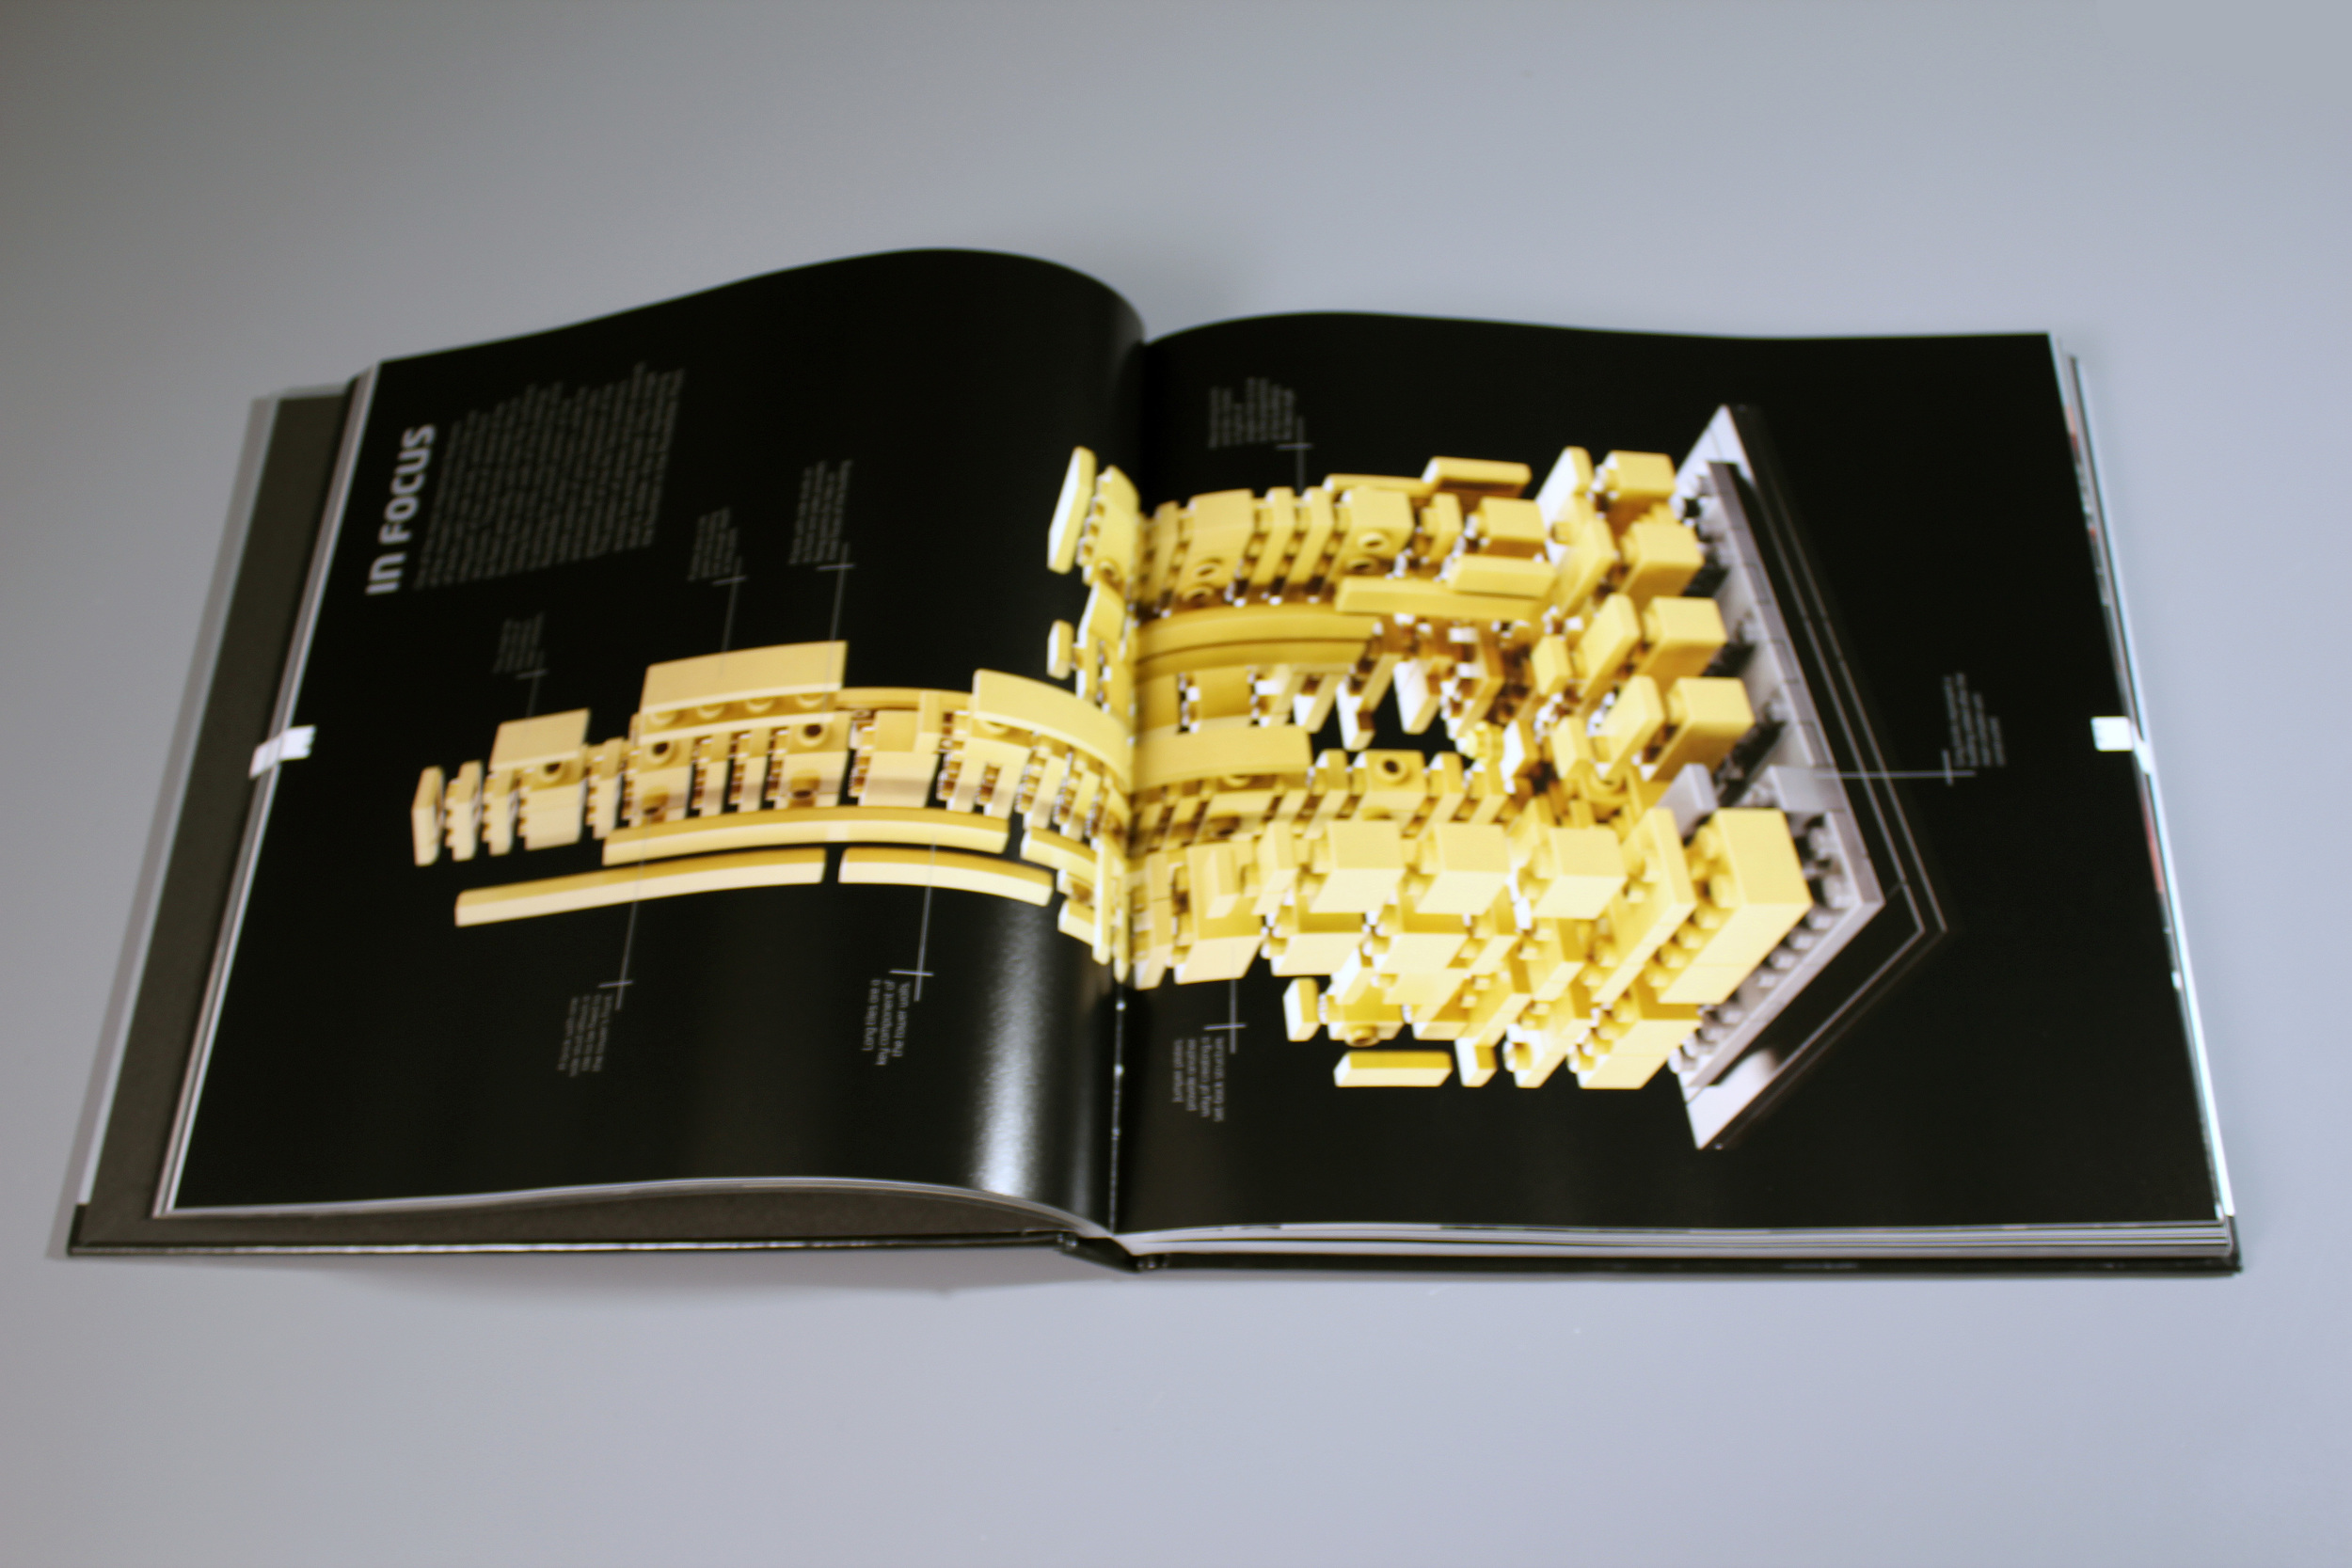 Review - LEGO Architecture The Visual Guide - BrickNerd - All things and the LEGO fan community